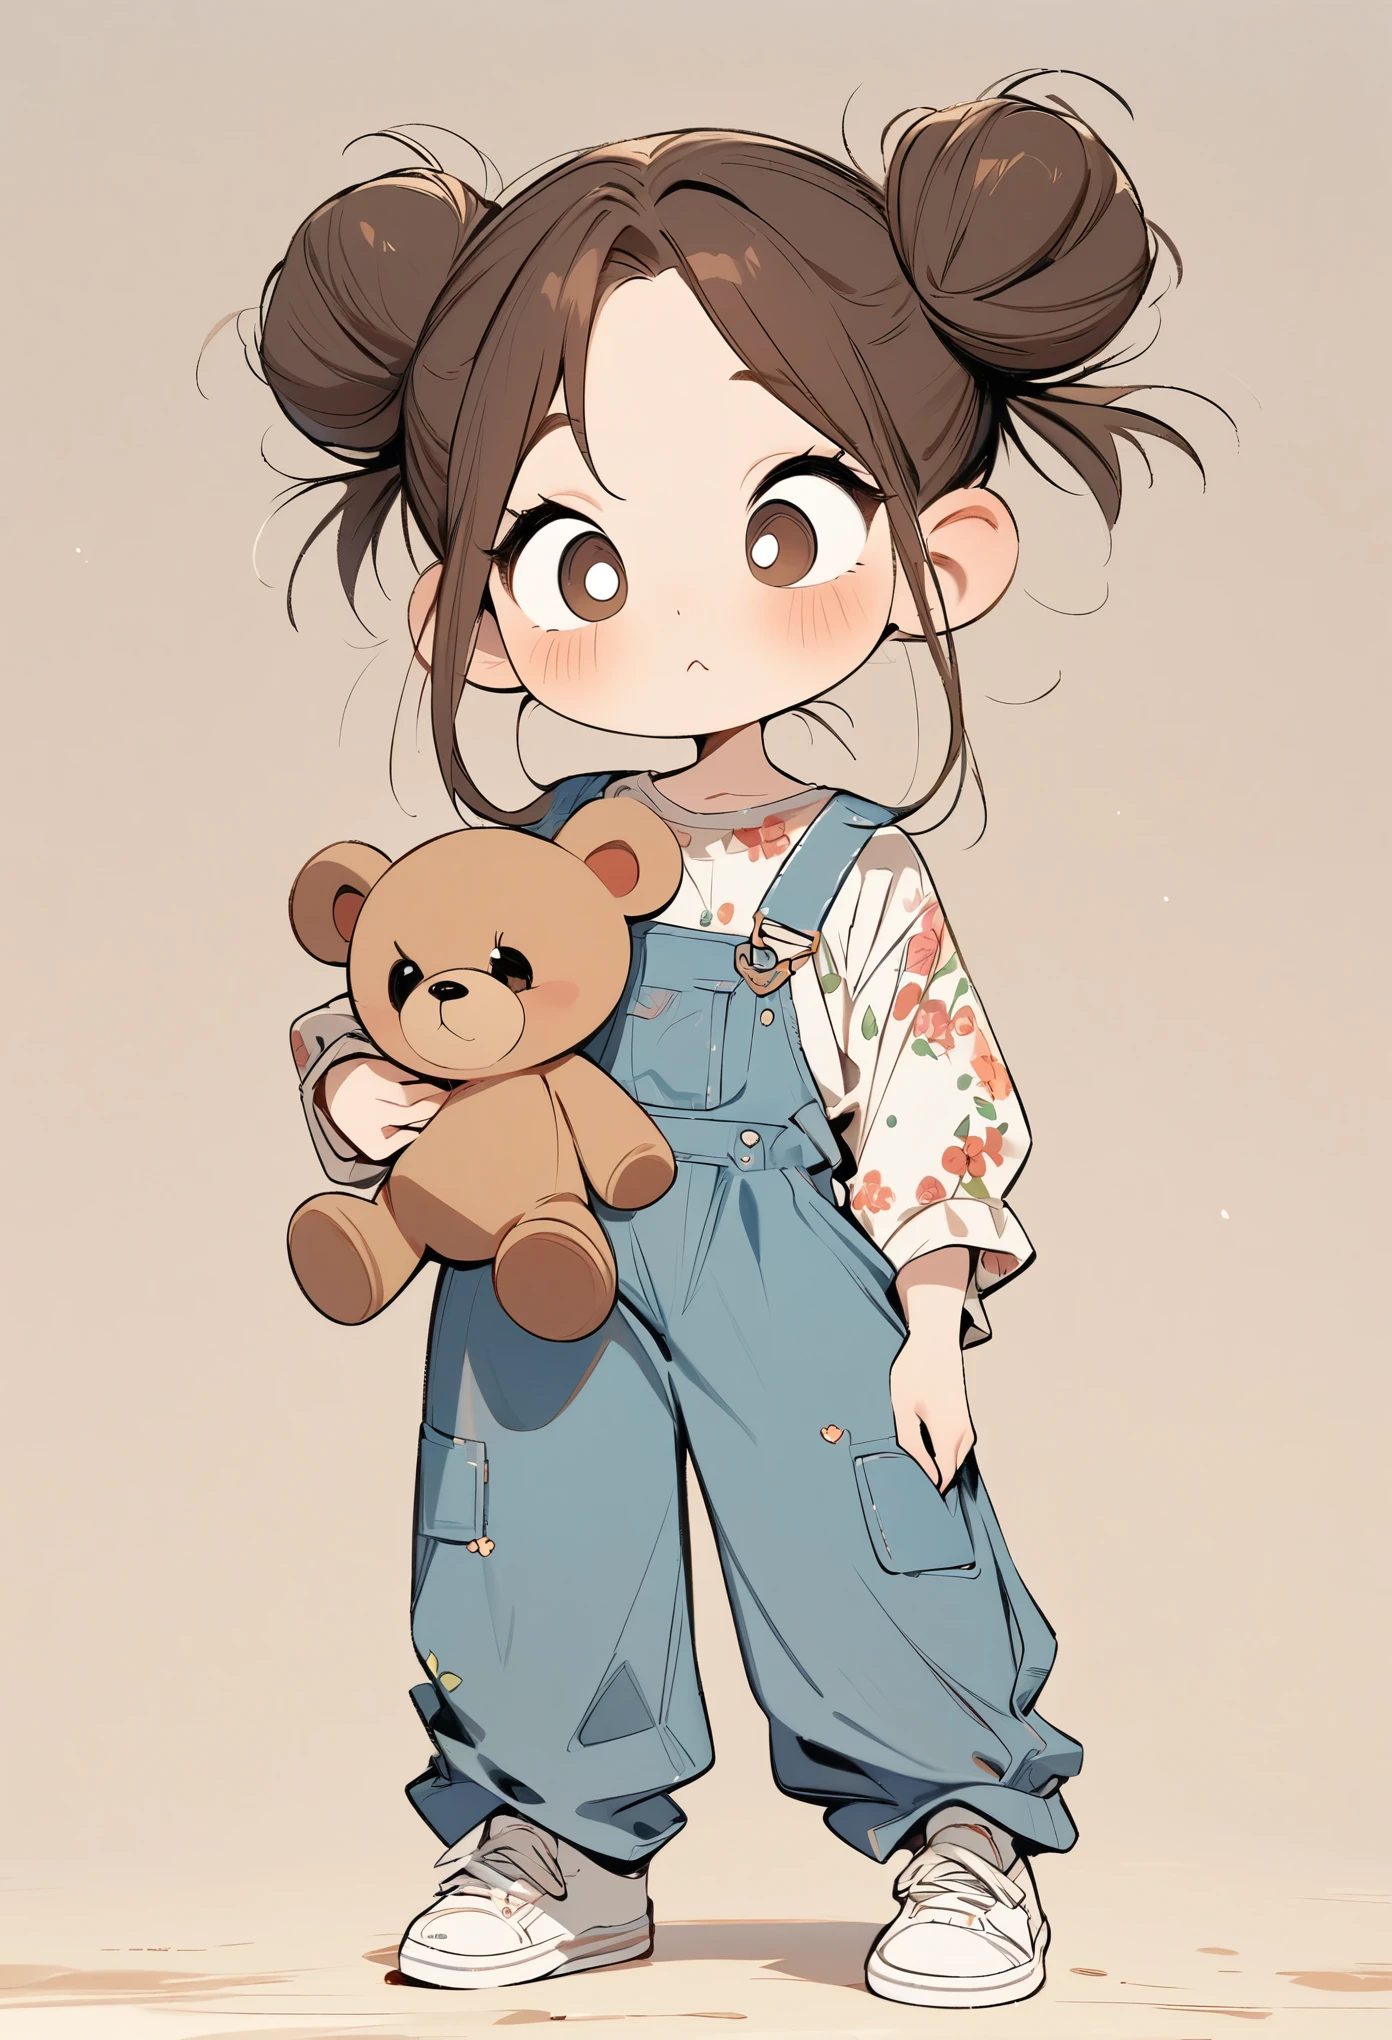 (masterpiece, best quality:1.2), 1 girl, alone，big eyes，a cute chinese girl，shirt，horse face skirt，Birds in the air，Cartoon style character design，exaggerated expression，hair texture，messy bun，a cat，interesting，interesting，clean lines